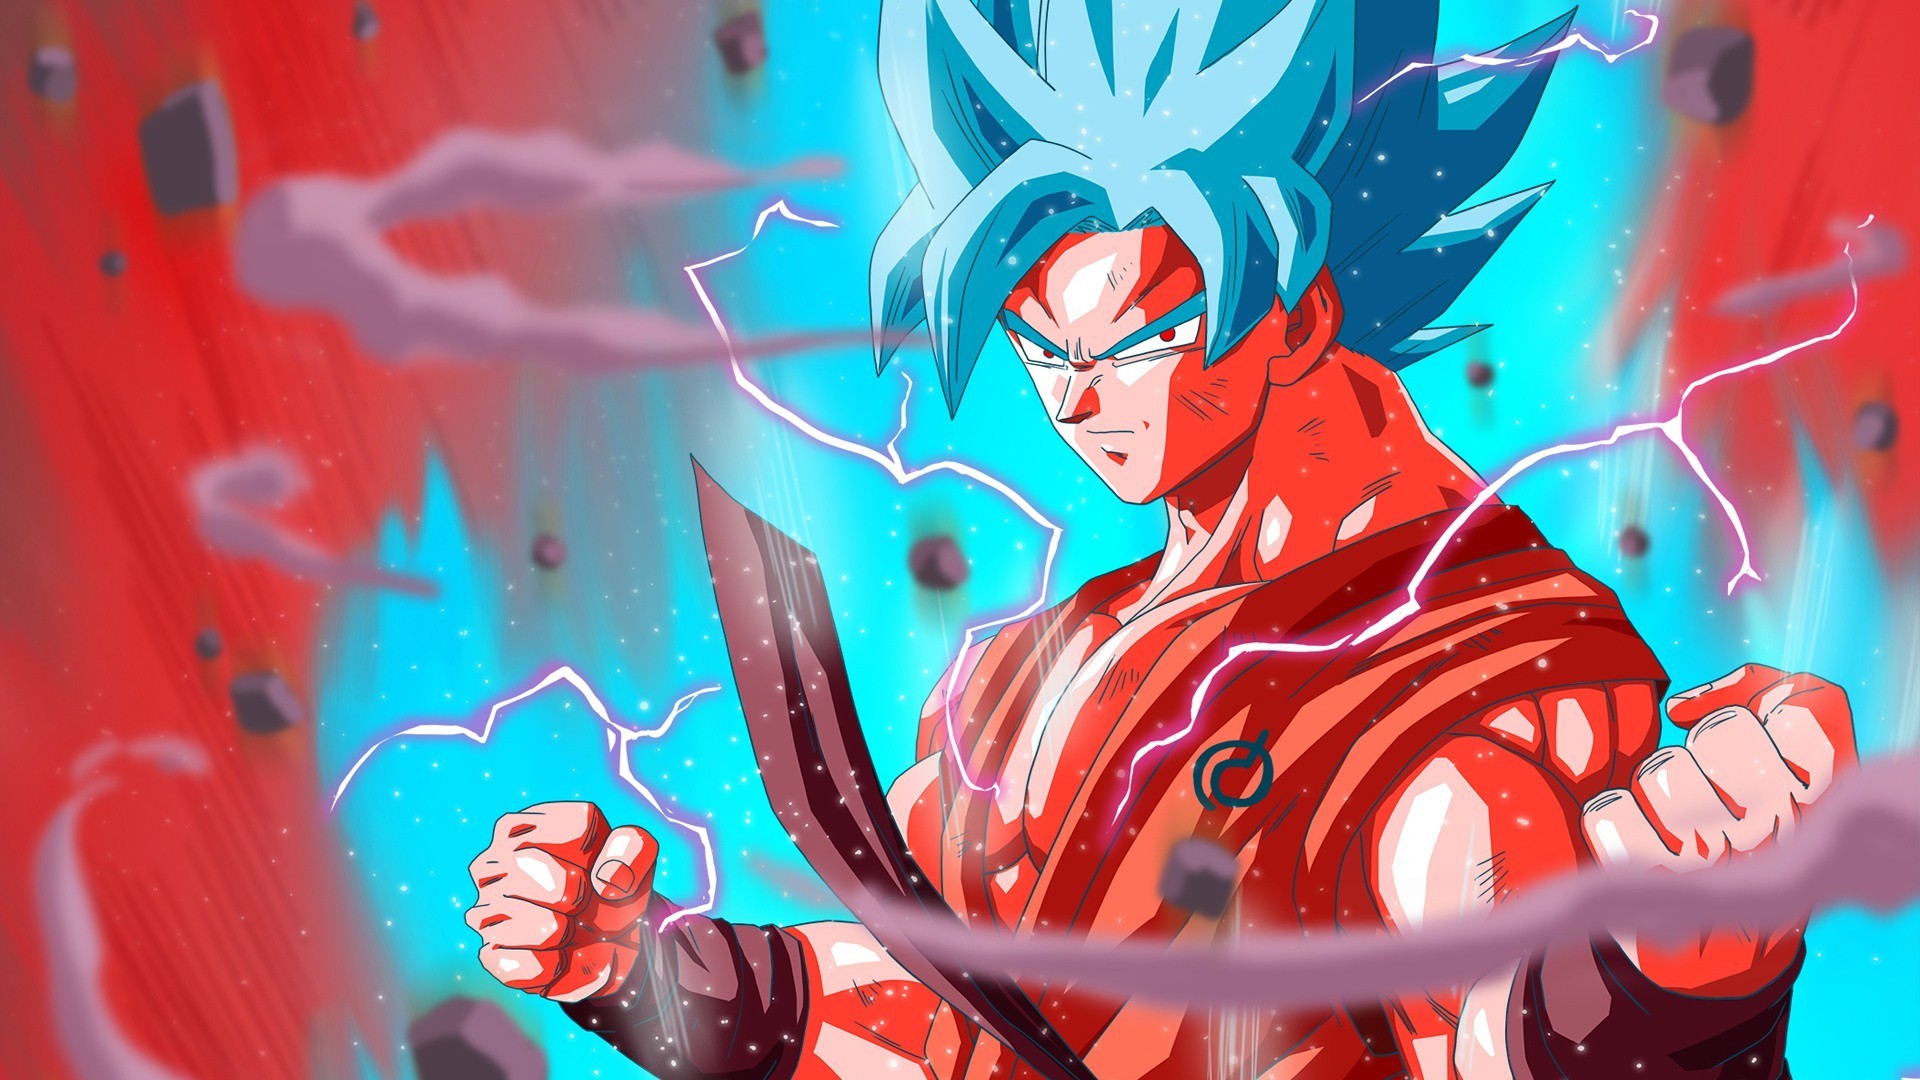 HD Wallpaper Goku SSJ Blue with image resolution 1920x1080 pixel. You can make this wallpaper for your Desktop Computer Backgrounds, Mac Wallpapers, Android Lock screen or iPhone Screensavers